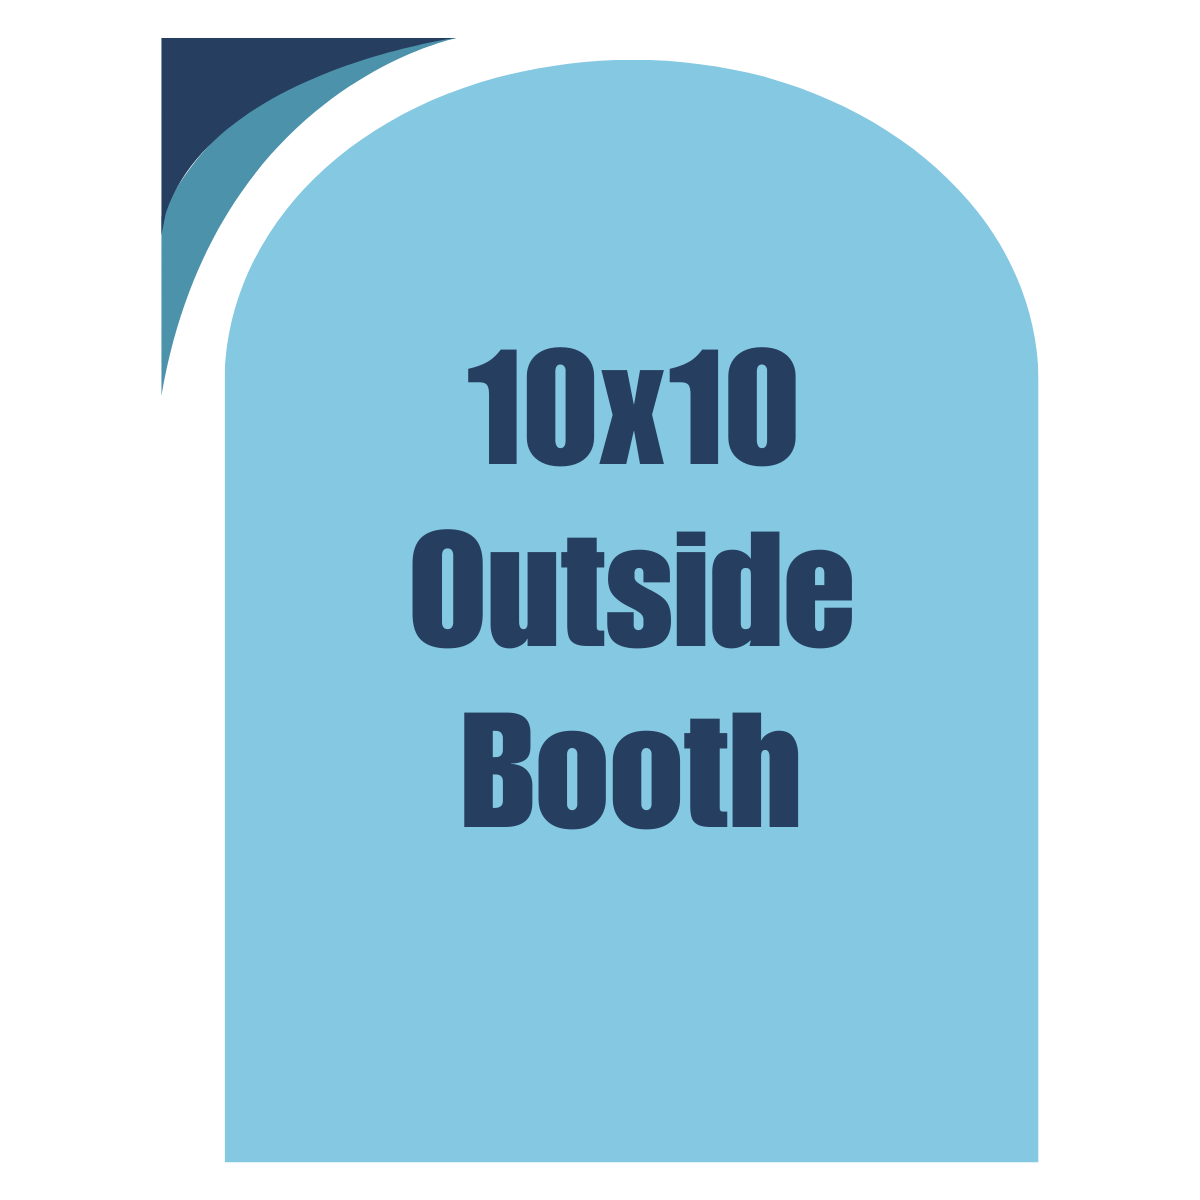 10x10 Outside Booth